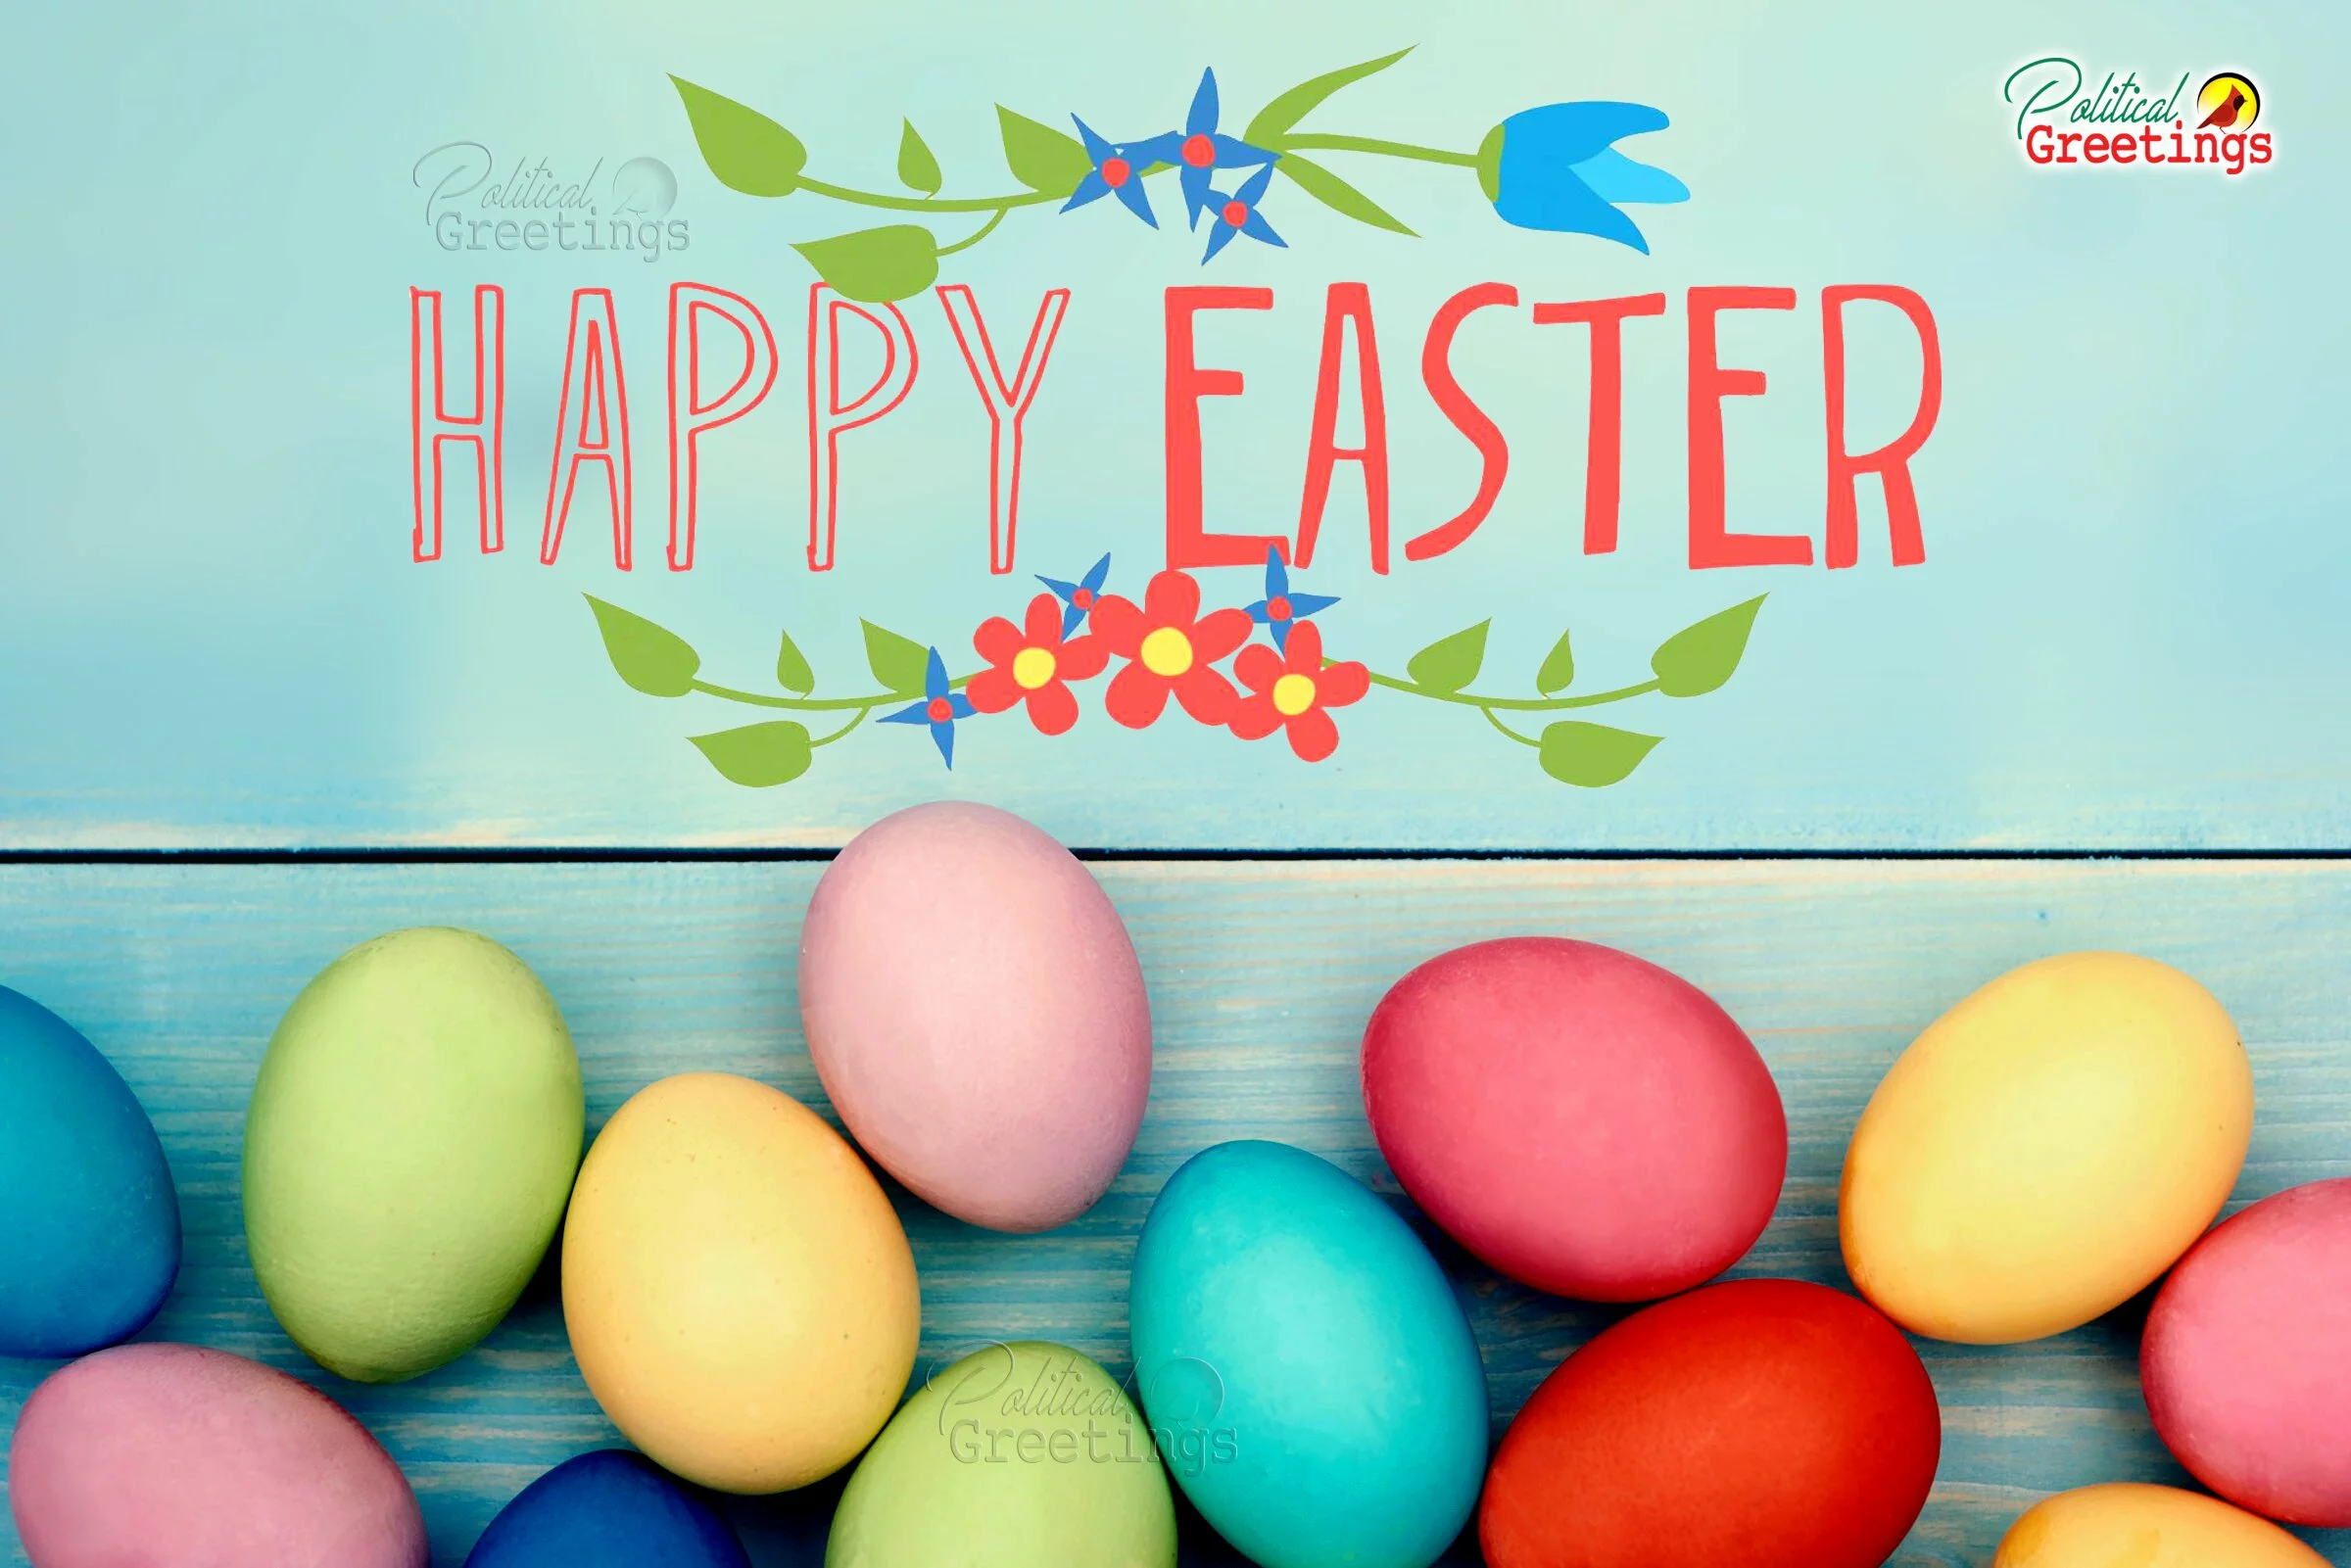 Happy-Easter-quotes-Pictures-with-Wishes